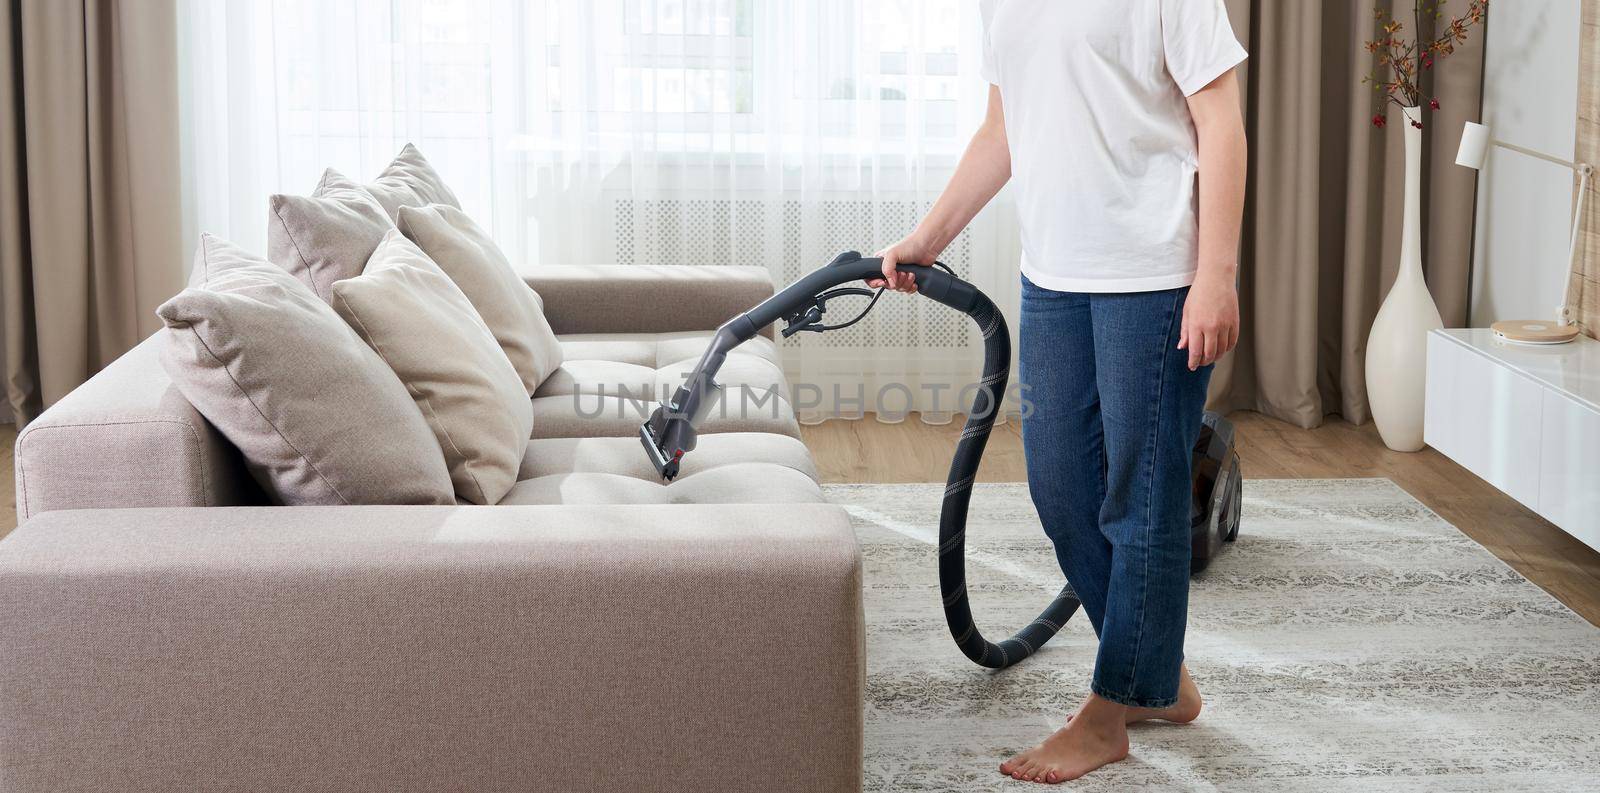 young woman in white shirt and jeans cleaning carpet under sofa with vacuum cleaner in living room, copy space. Housework, cleanig and chores concept by Mariakray